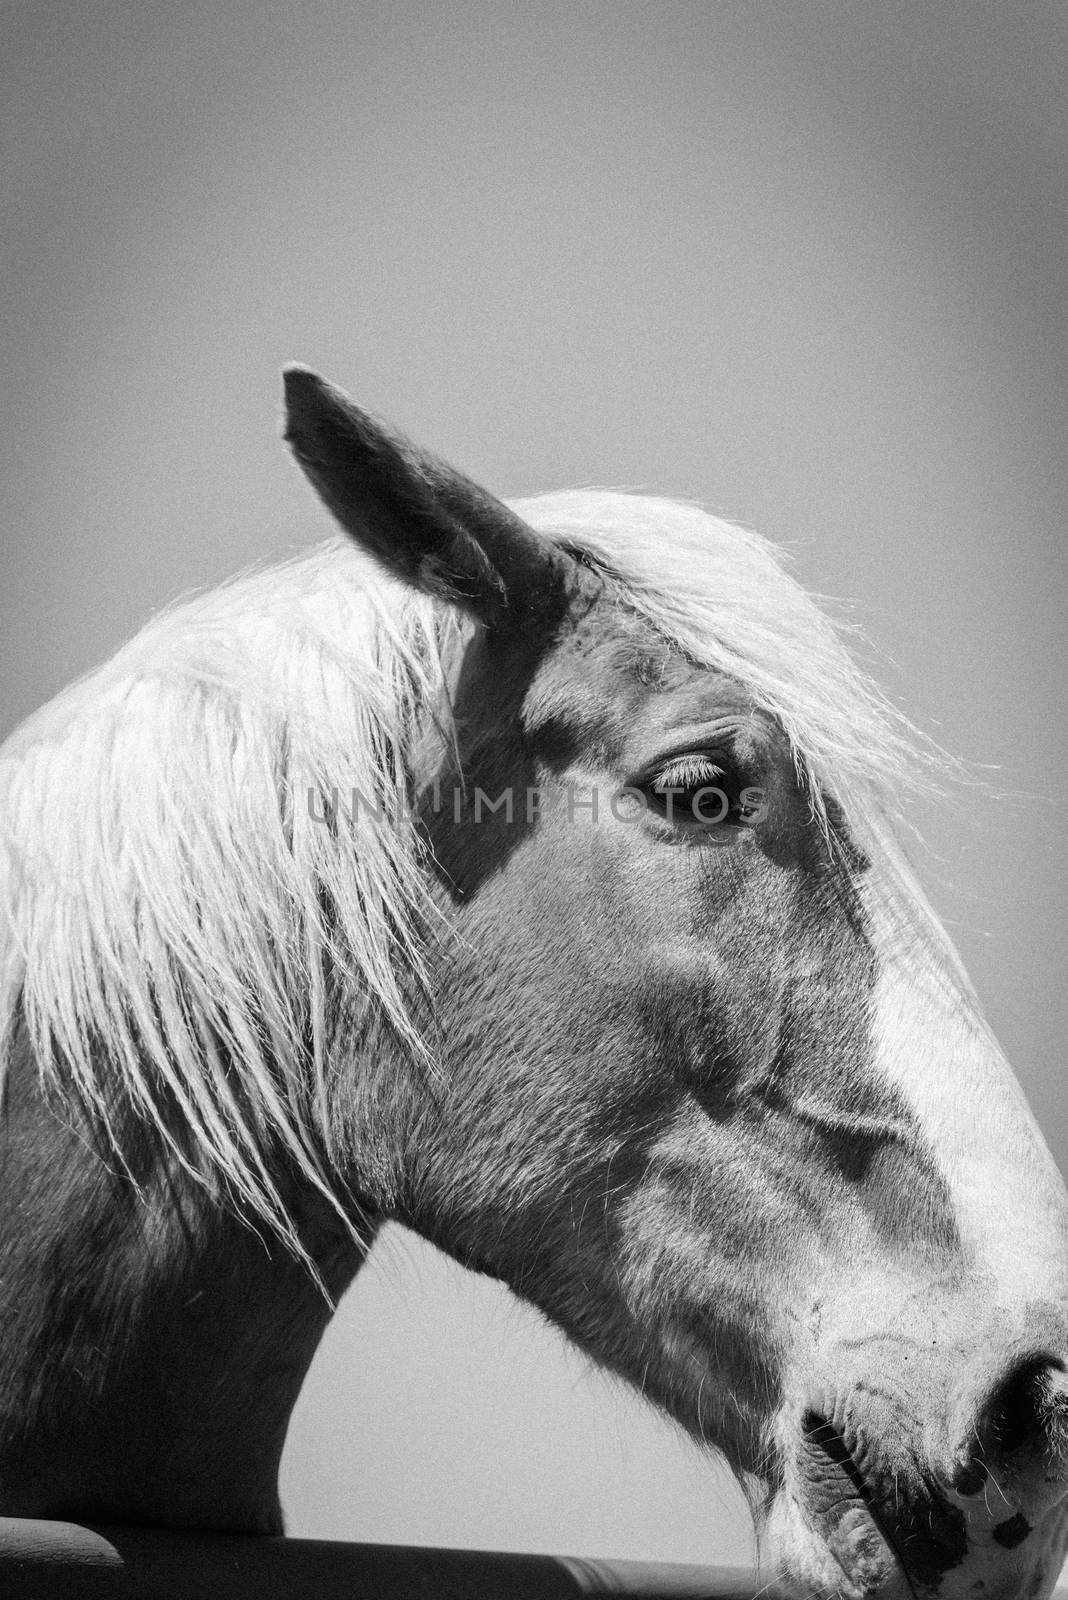 Black and white view close-up the head of Belgian horse at ranch in Bristol, Texas, USA. Known as Heavy, or Brabant, it is a draft horse breed from the Brabant region of modern Belgium.